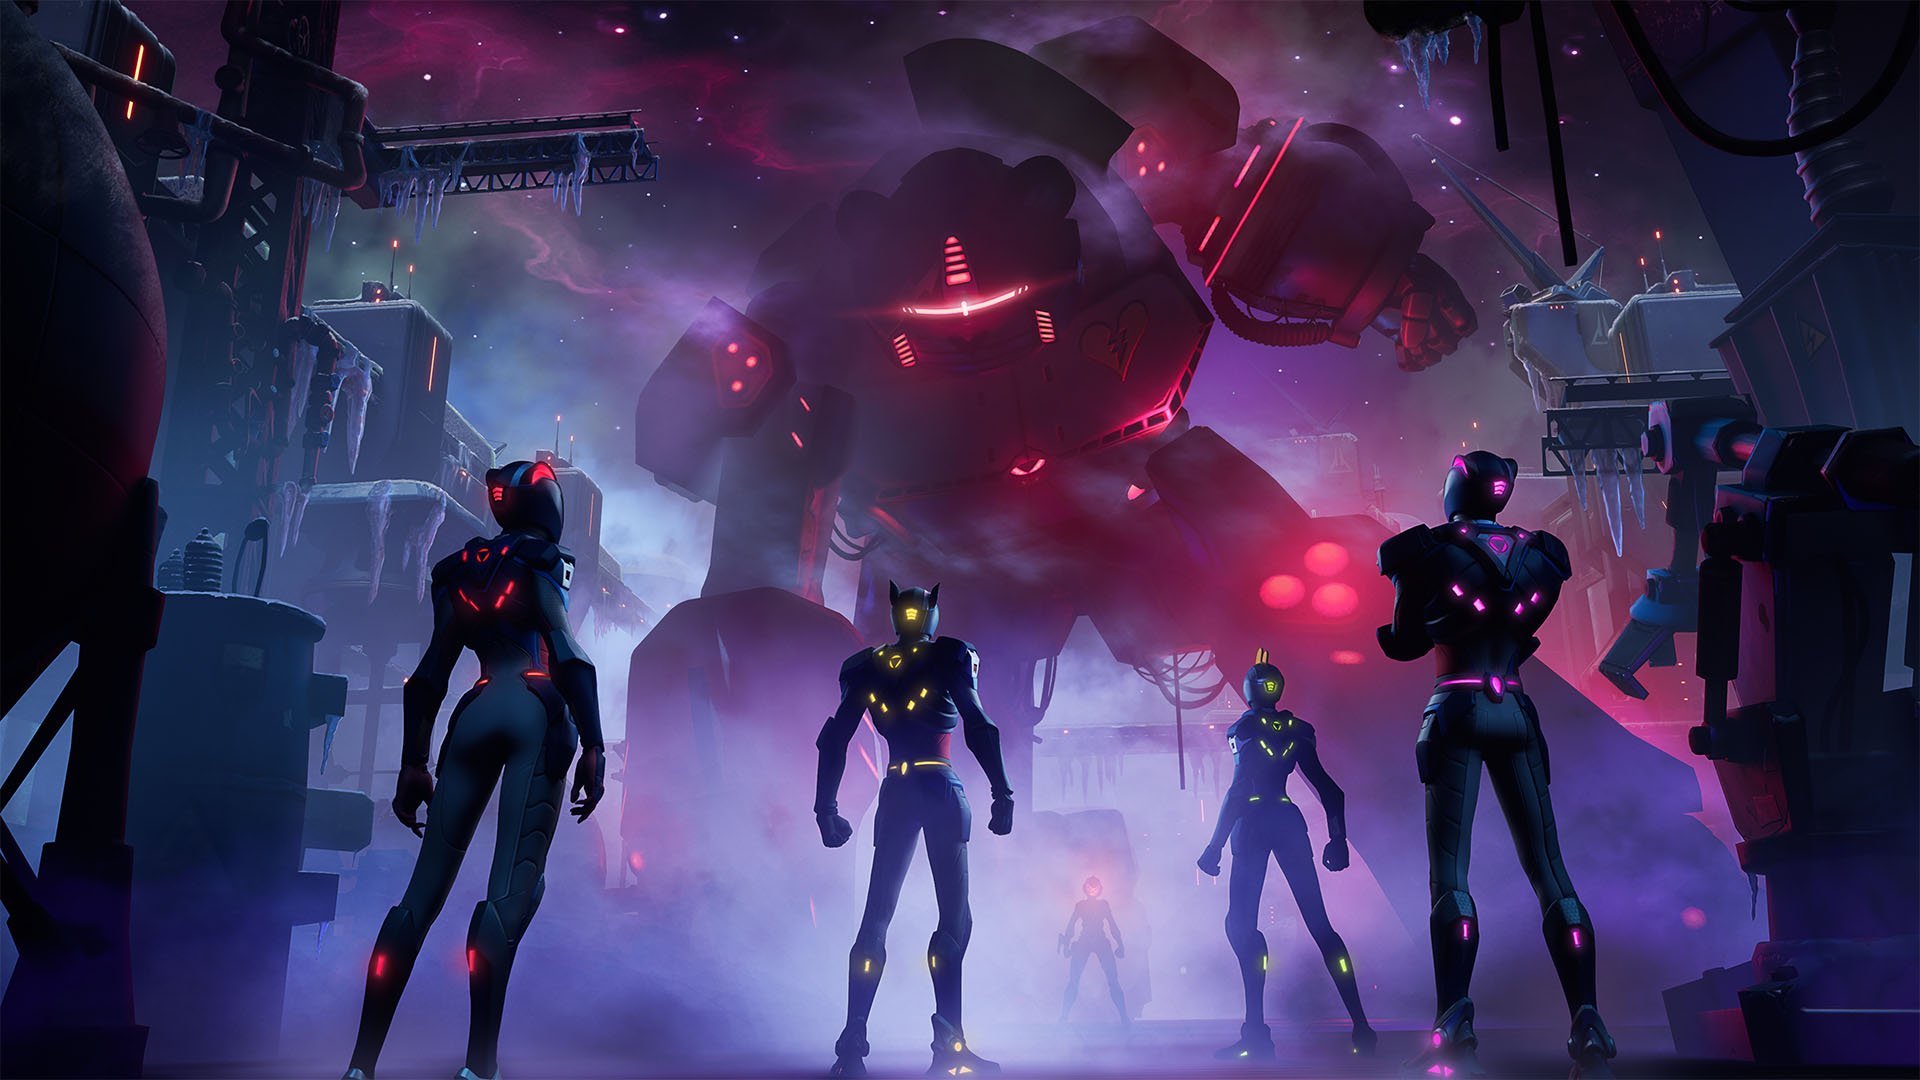 A giant mech punches the ground in front of The Paradigm, while four people in mech control suits look up at it